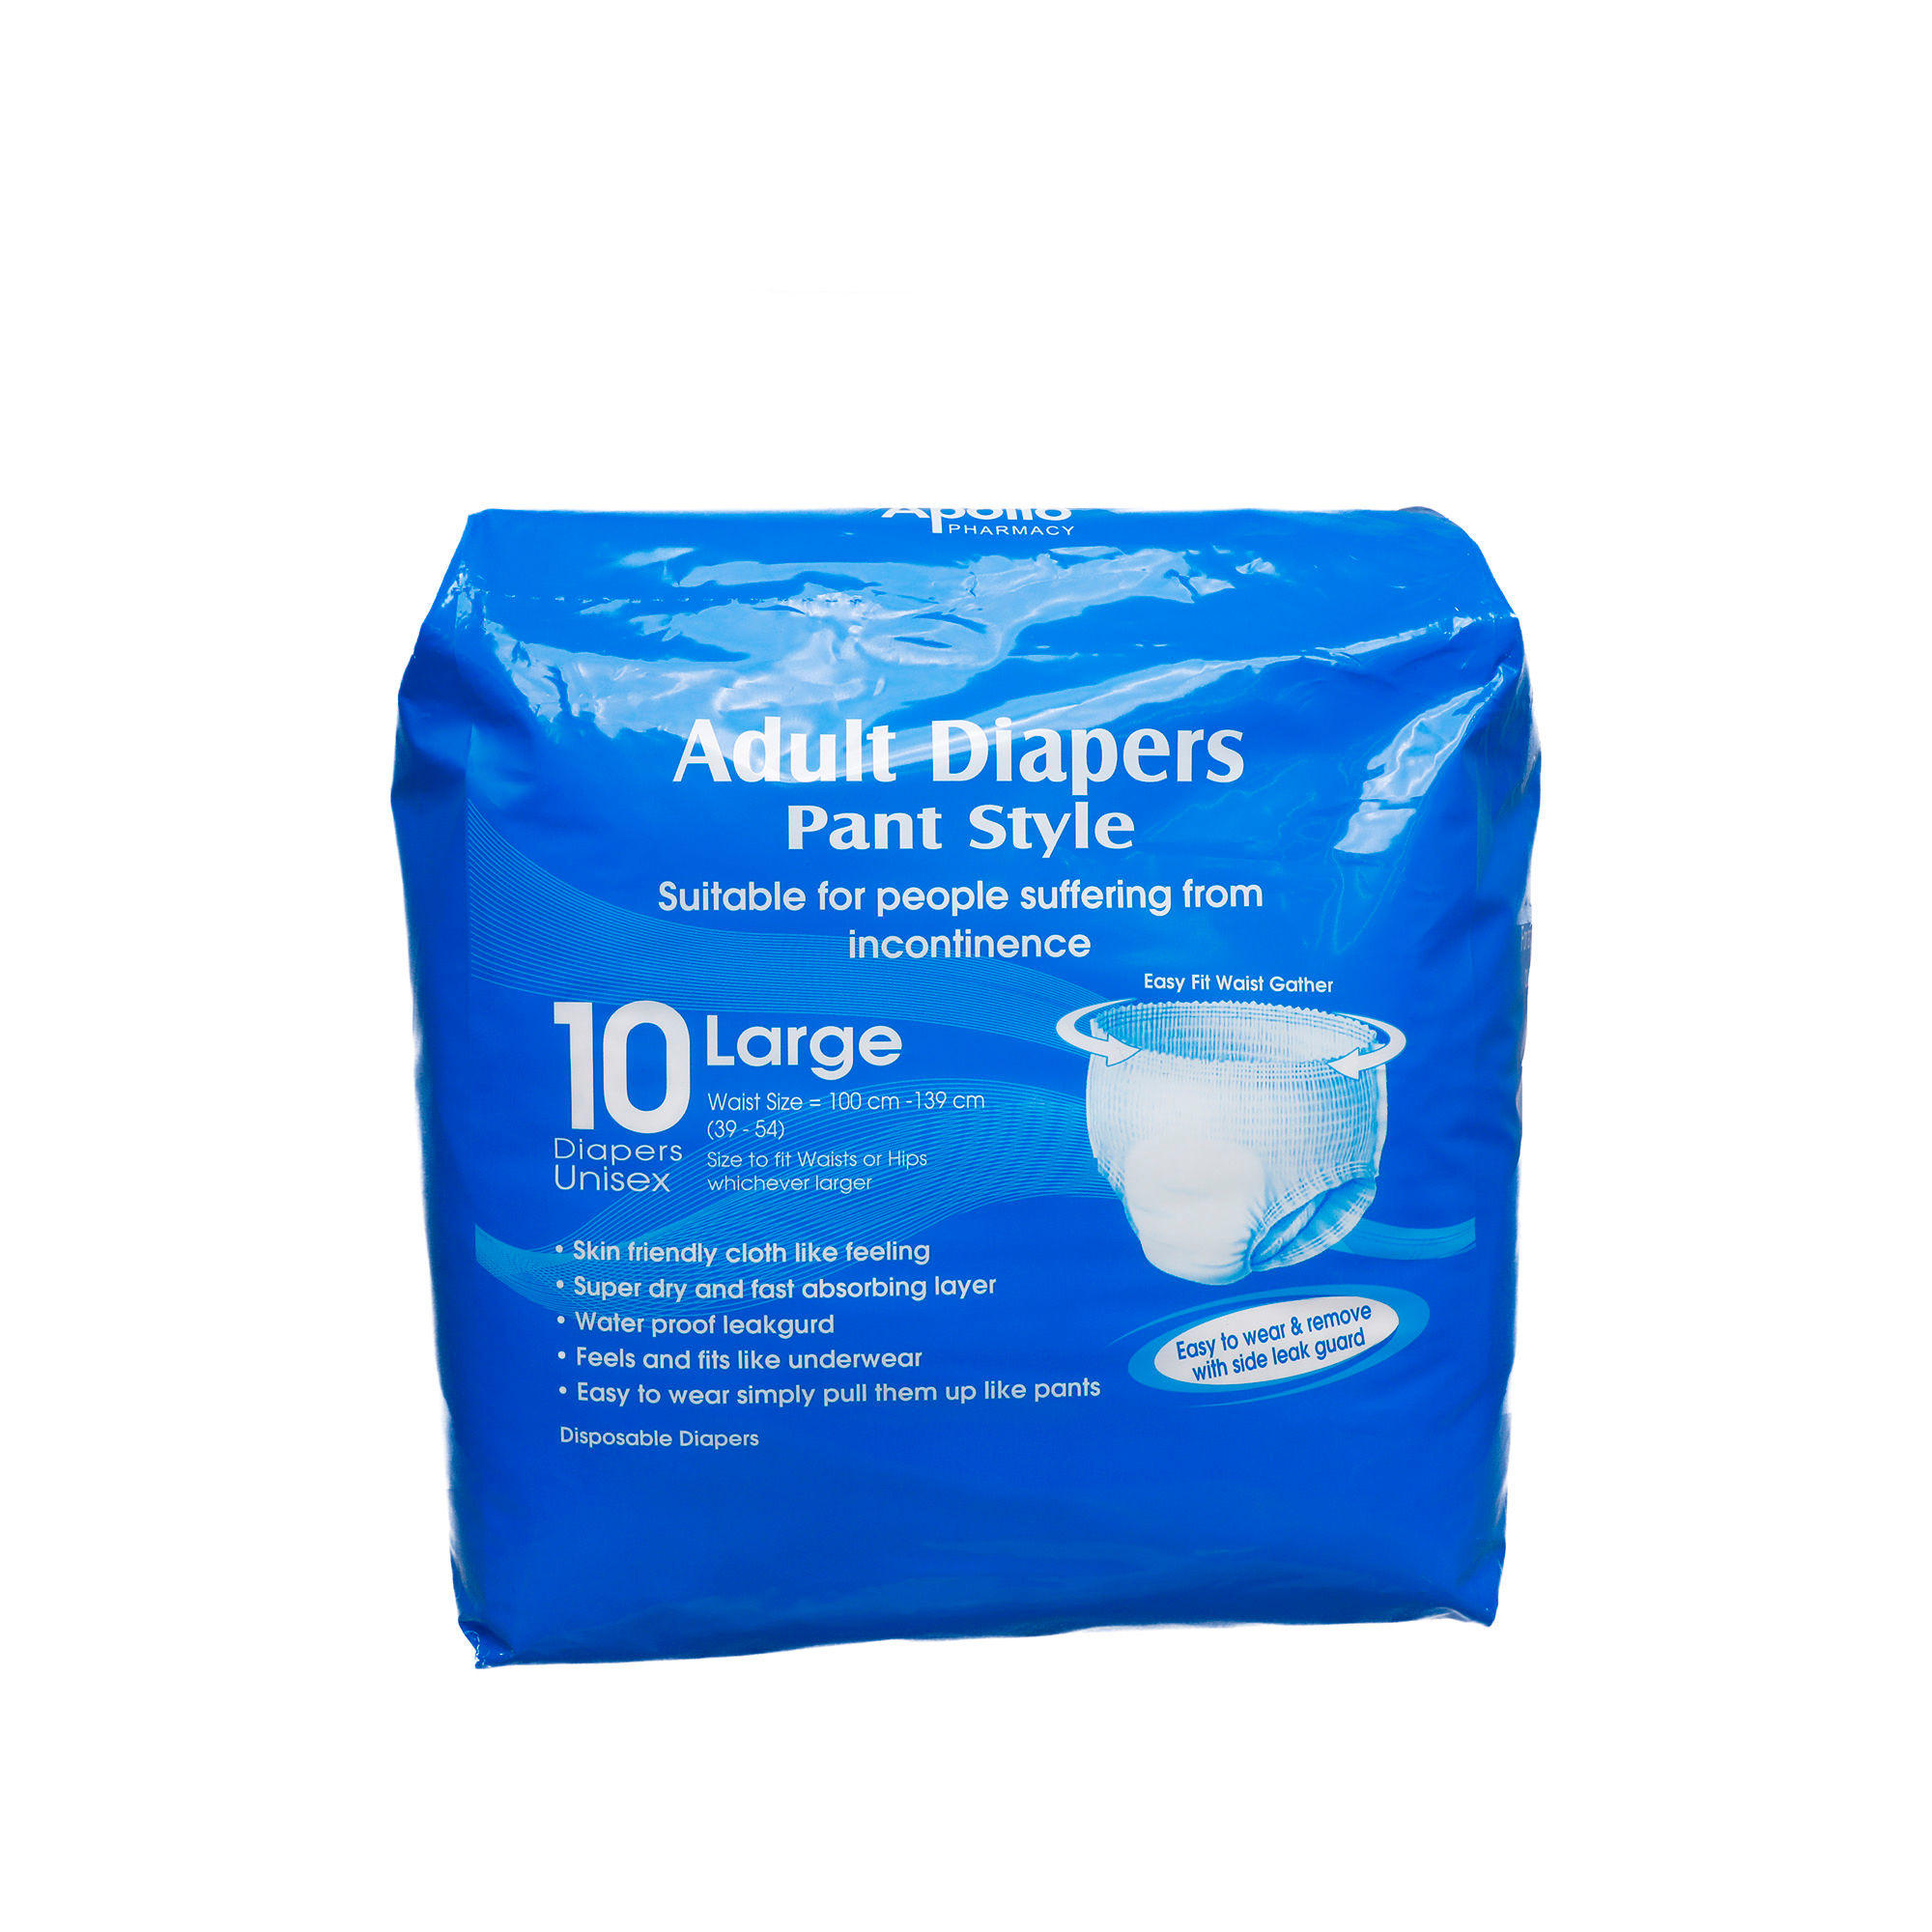 Apollo Pharmacy Adult Diaper Pants Large, 10 Count, Pack of 1 